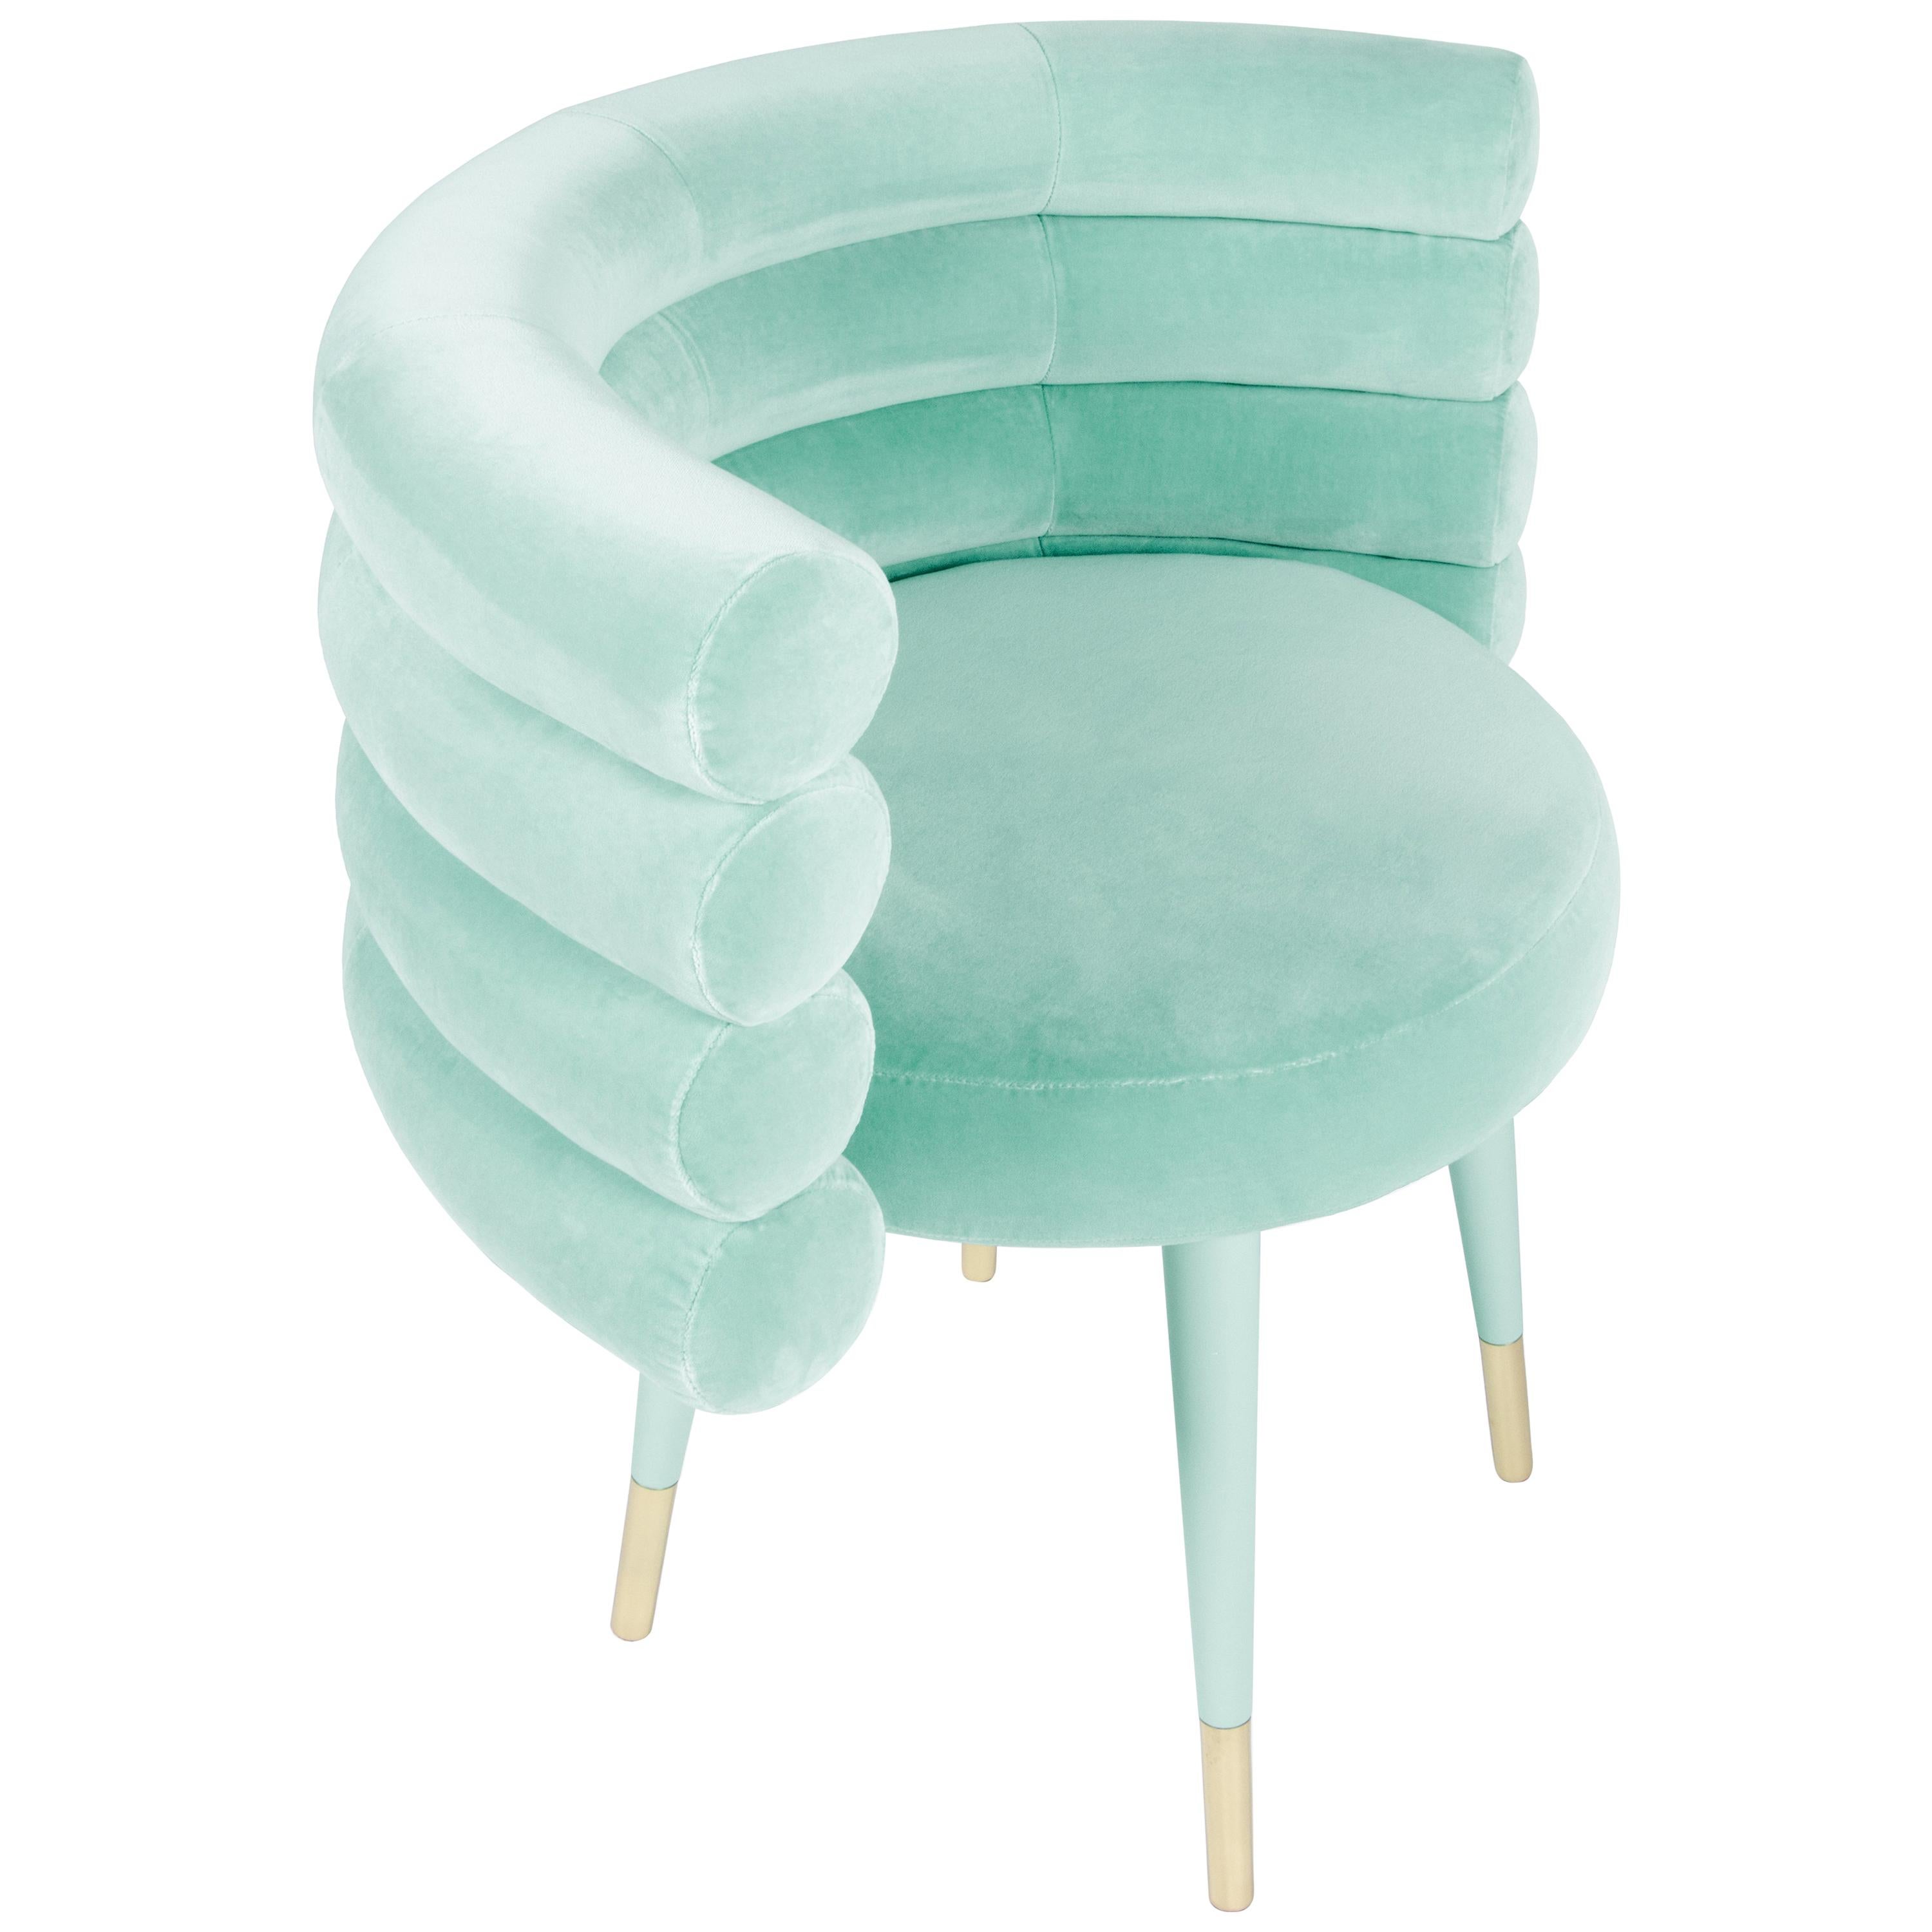 Contemporary Sky Blue Marshmallow Dining Chair, Royal Stranger